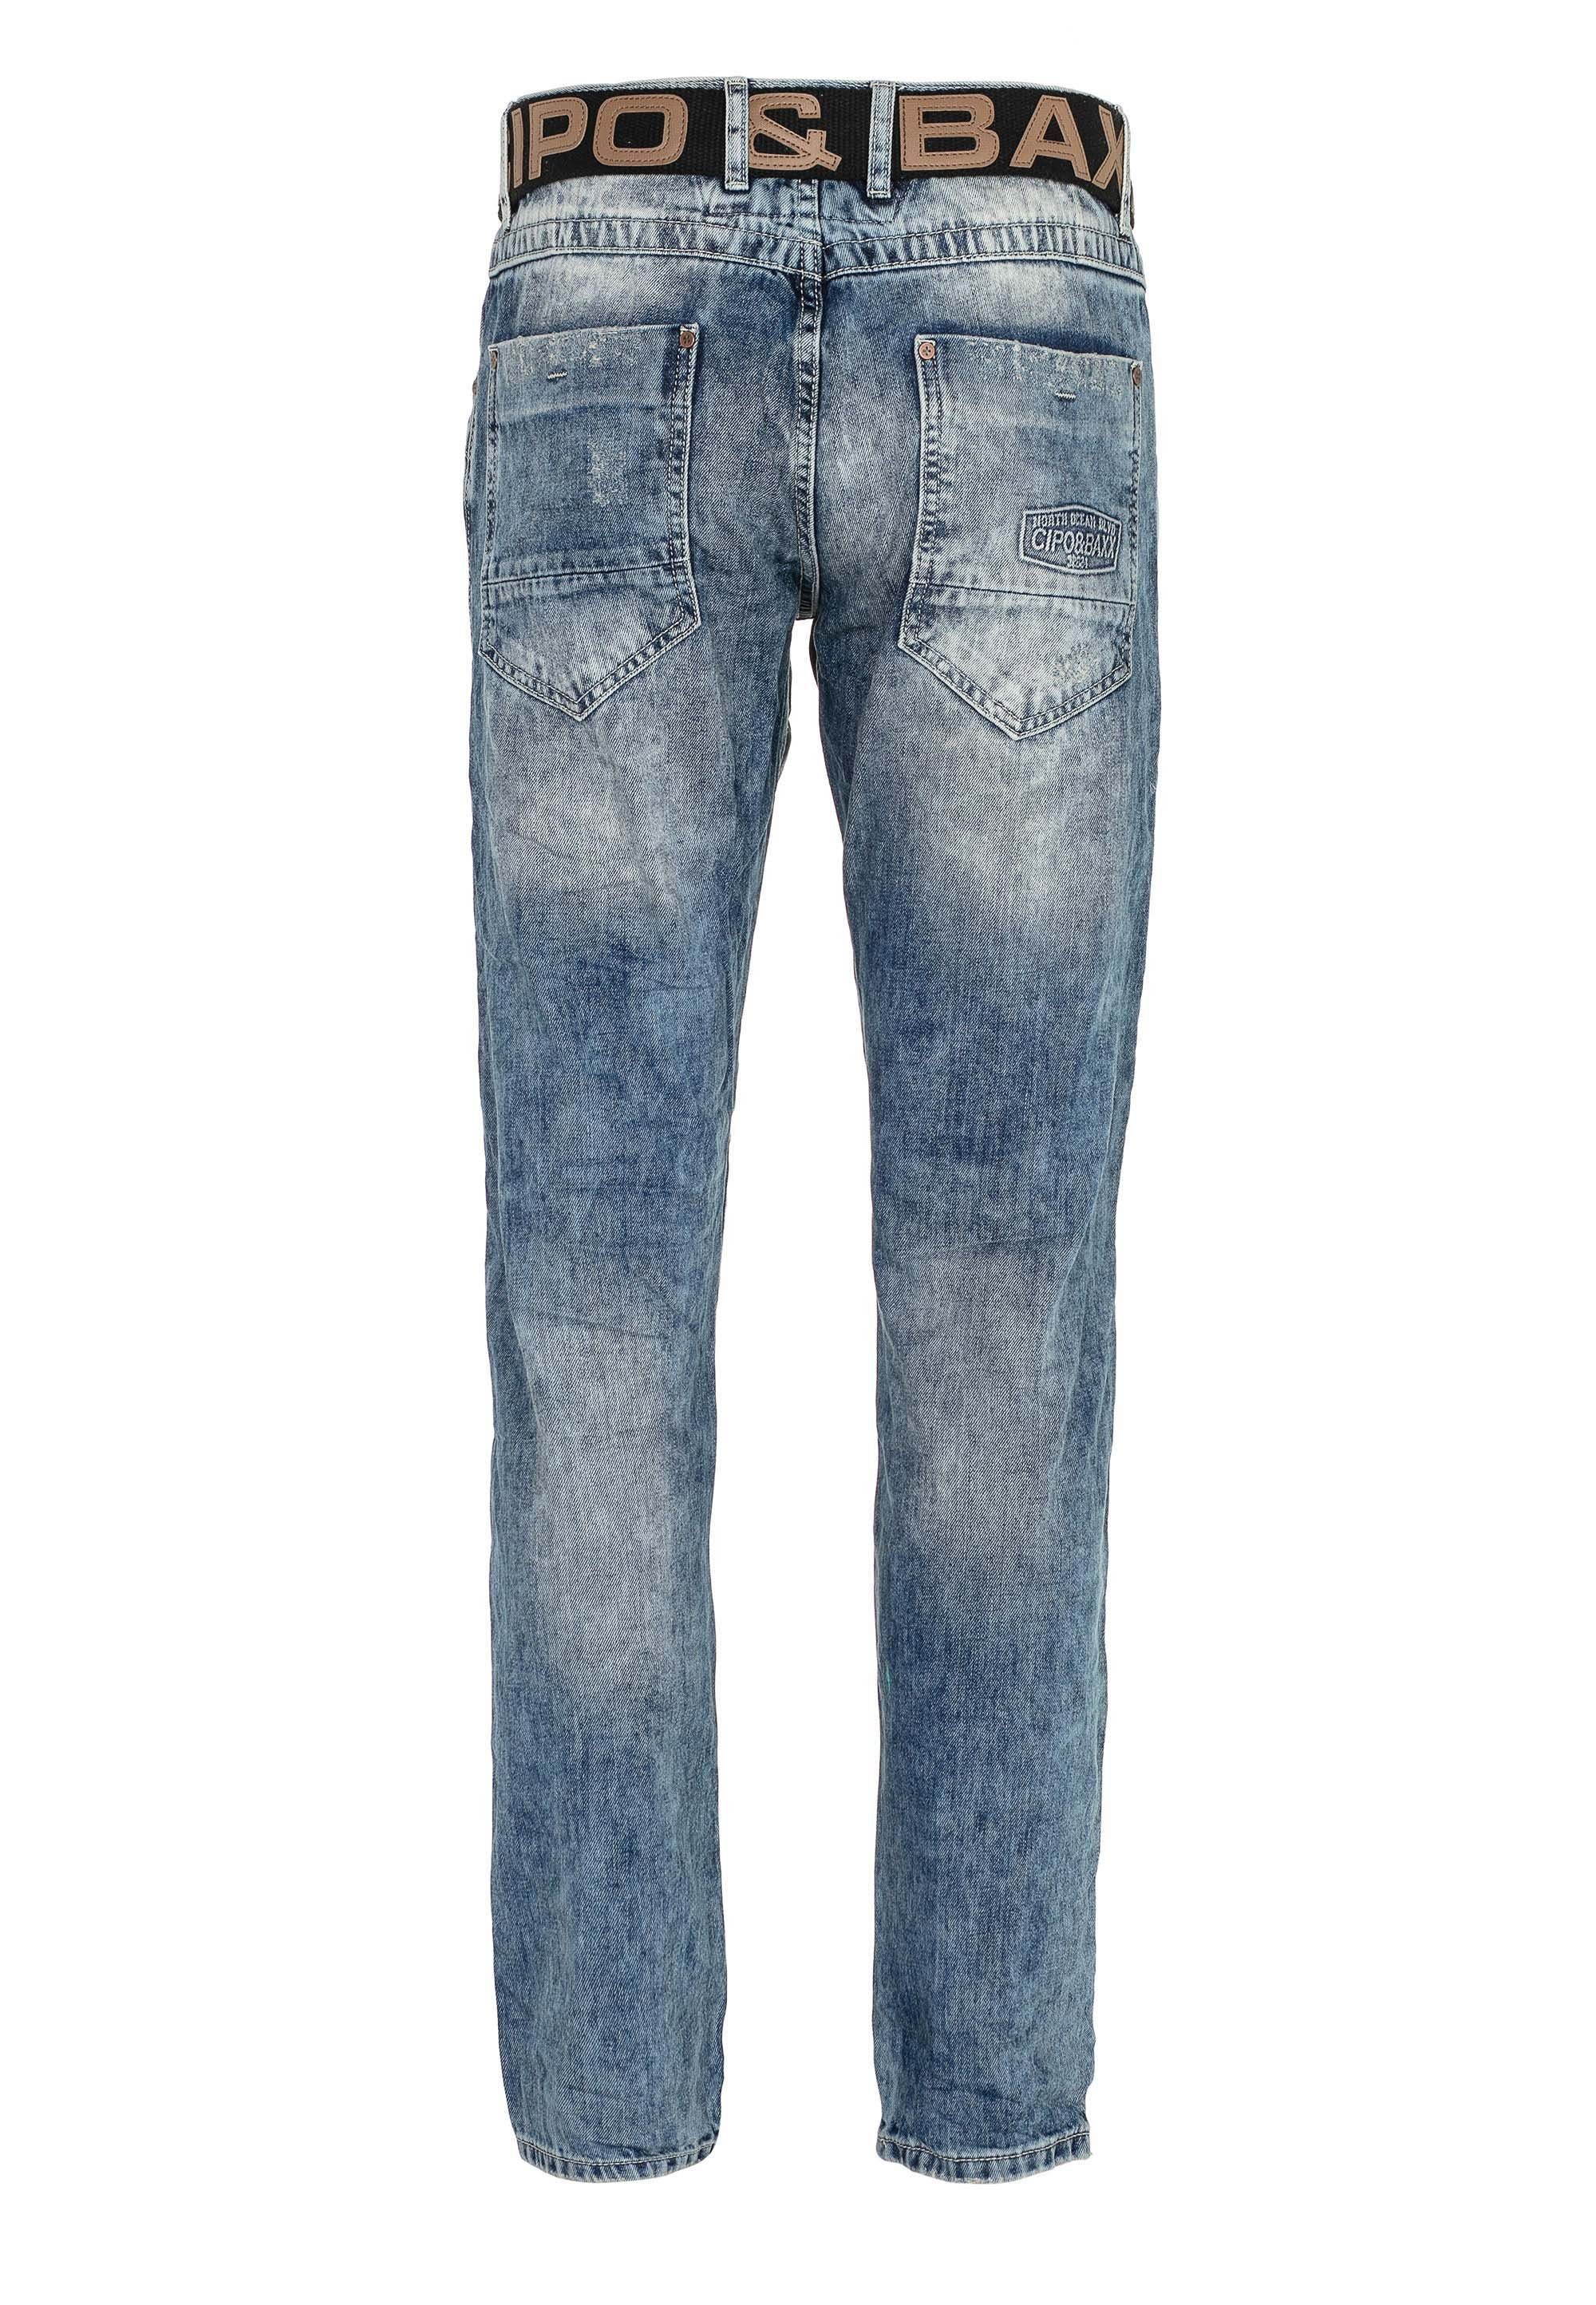 Cipo & Baxx Bequeme Details Jeans in Straight-Fit mit Ripped